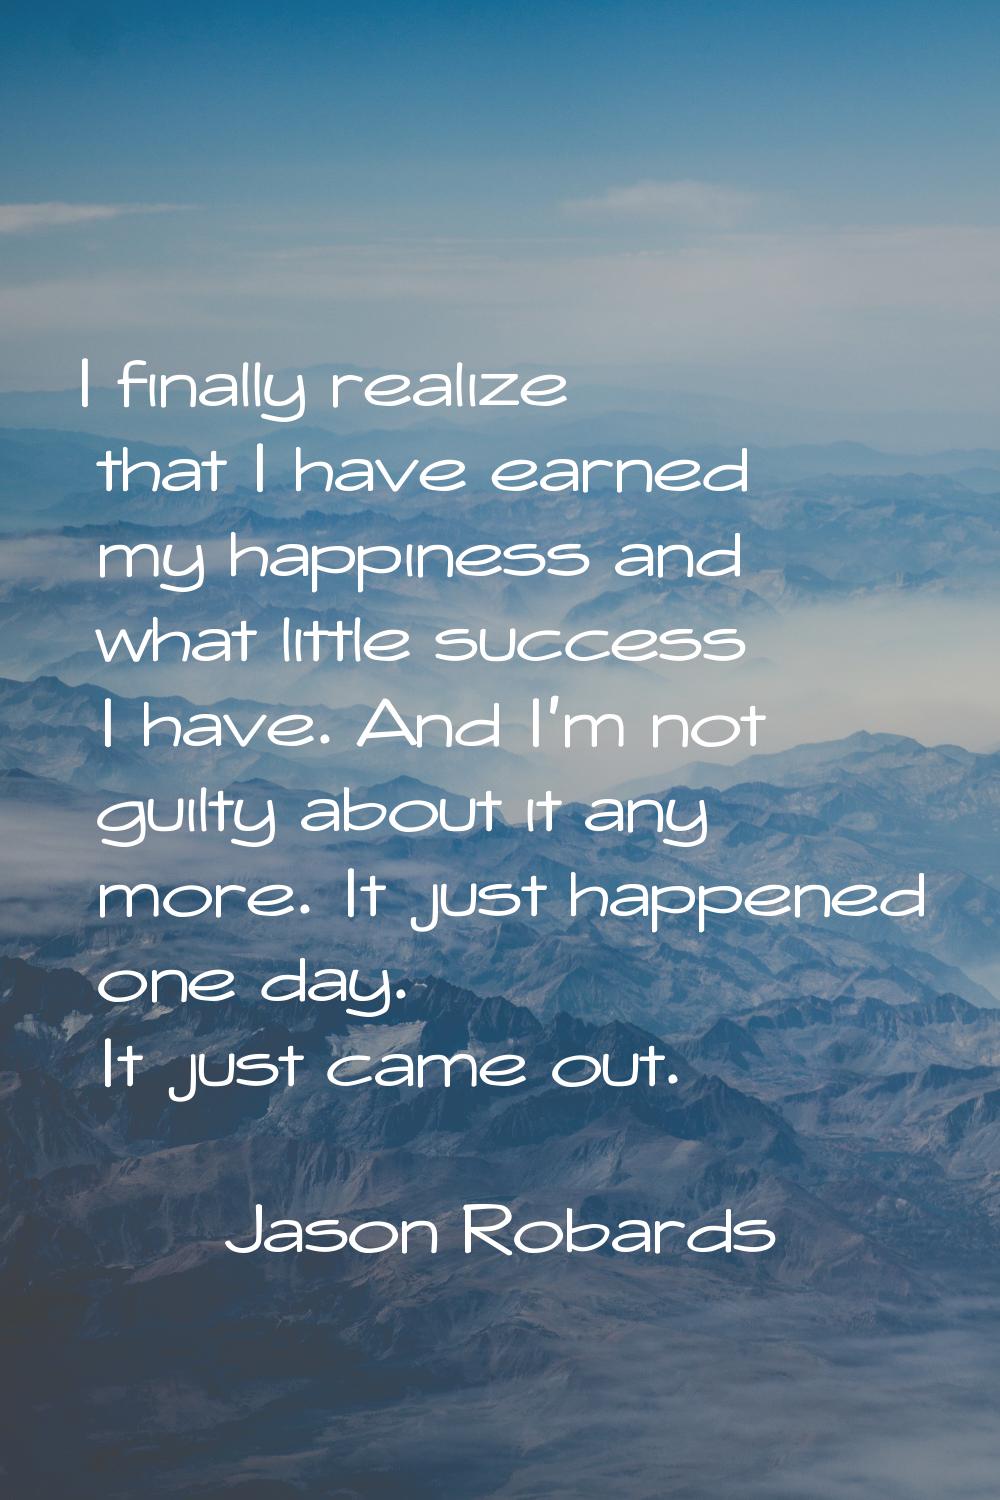 I finally realize that I have earned my happiness and what little success I have. And I'm not guilt